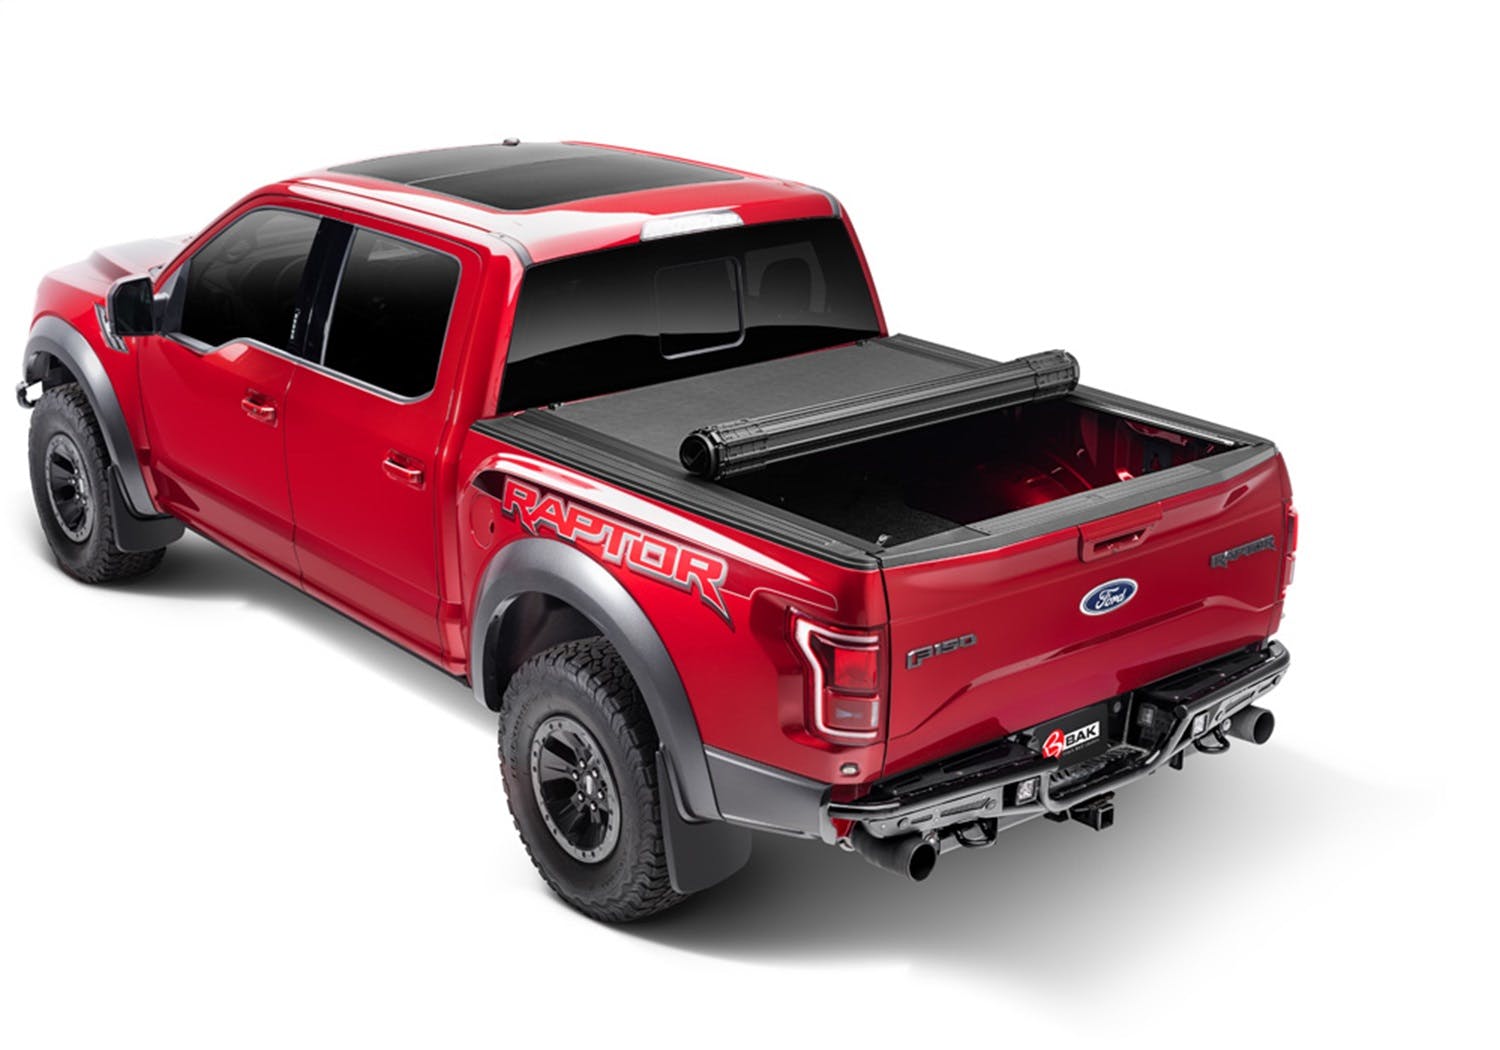 BAK Industries 80538 Revolver X4s Hard Rolling Truck Bed Cover